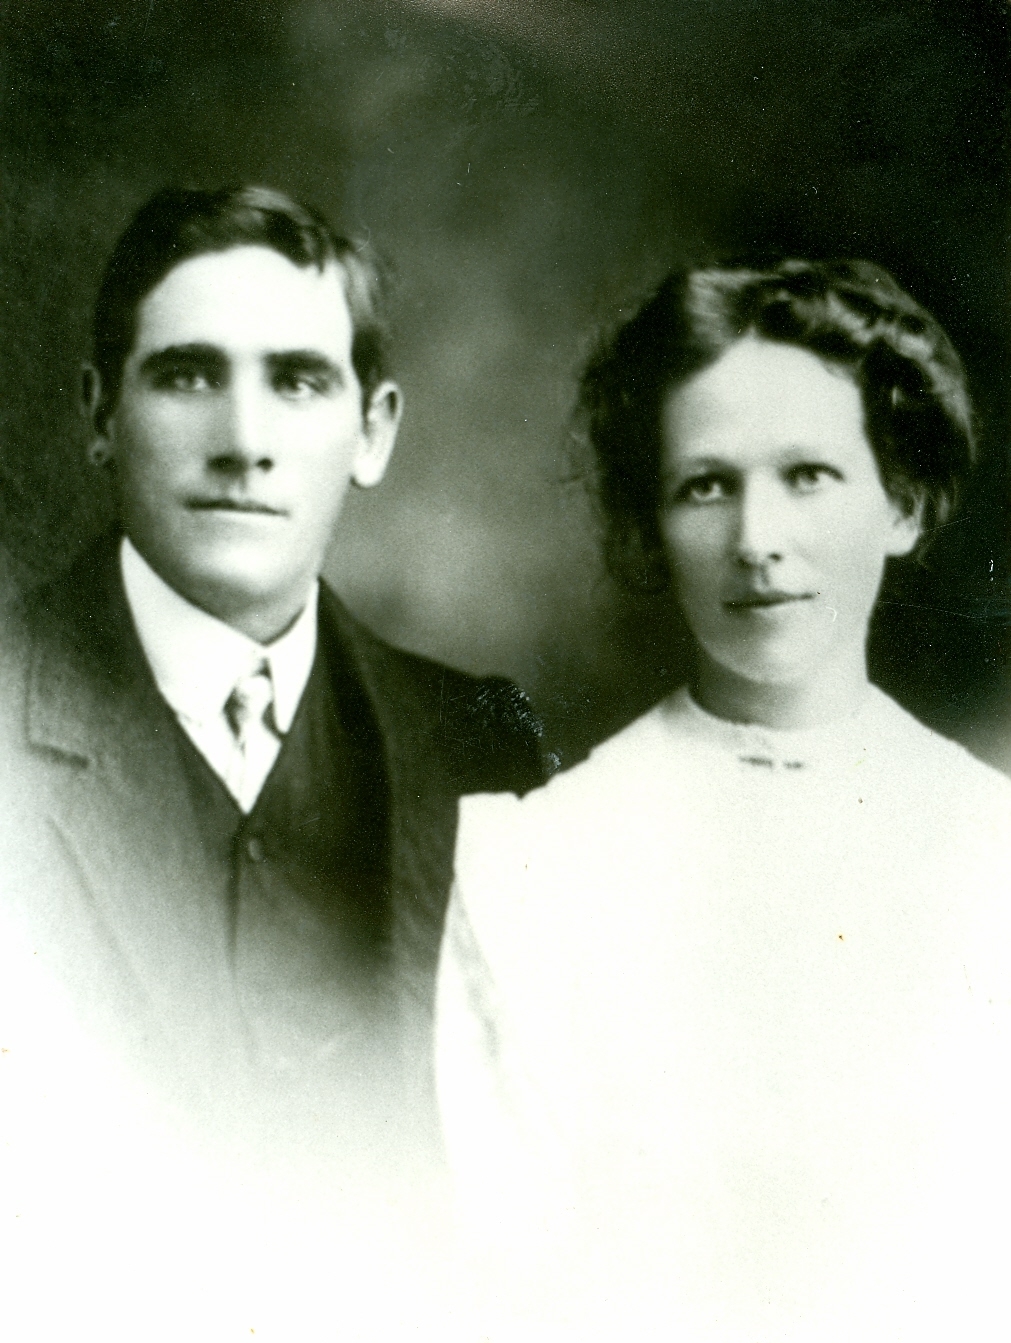 Edward and Flo Bunker